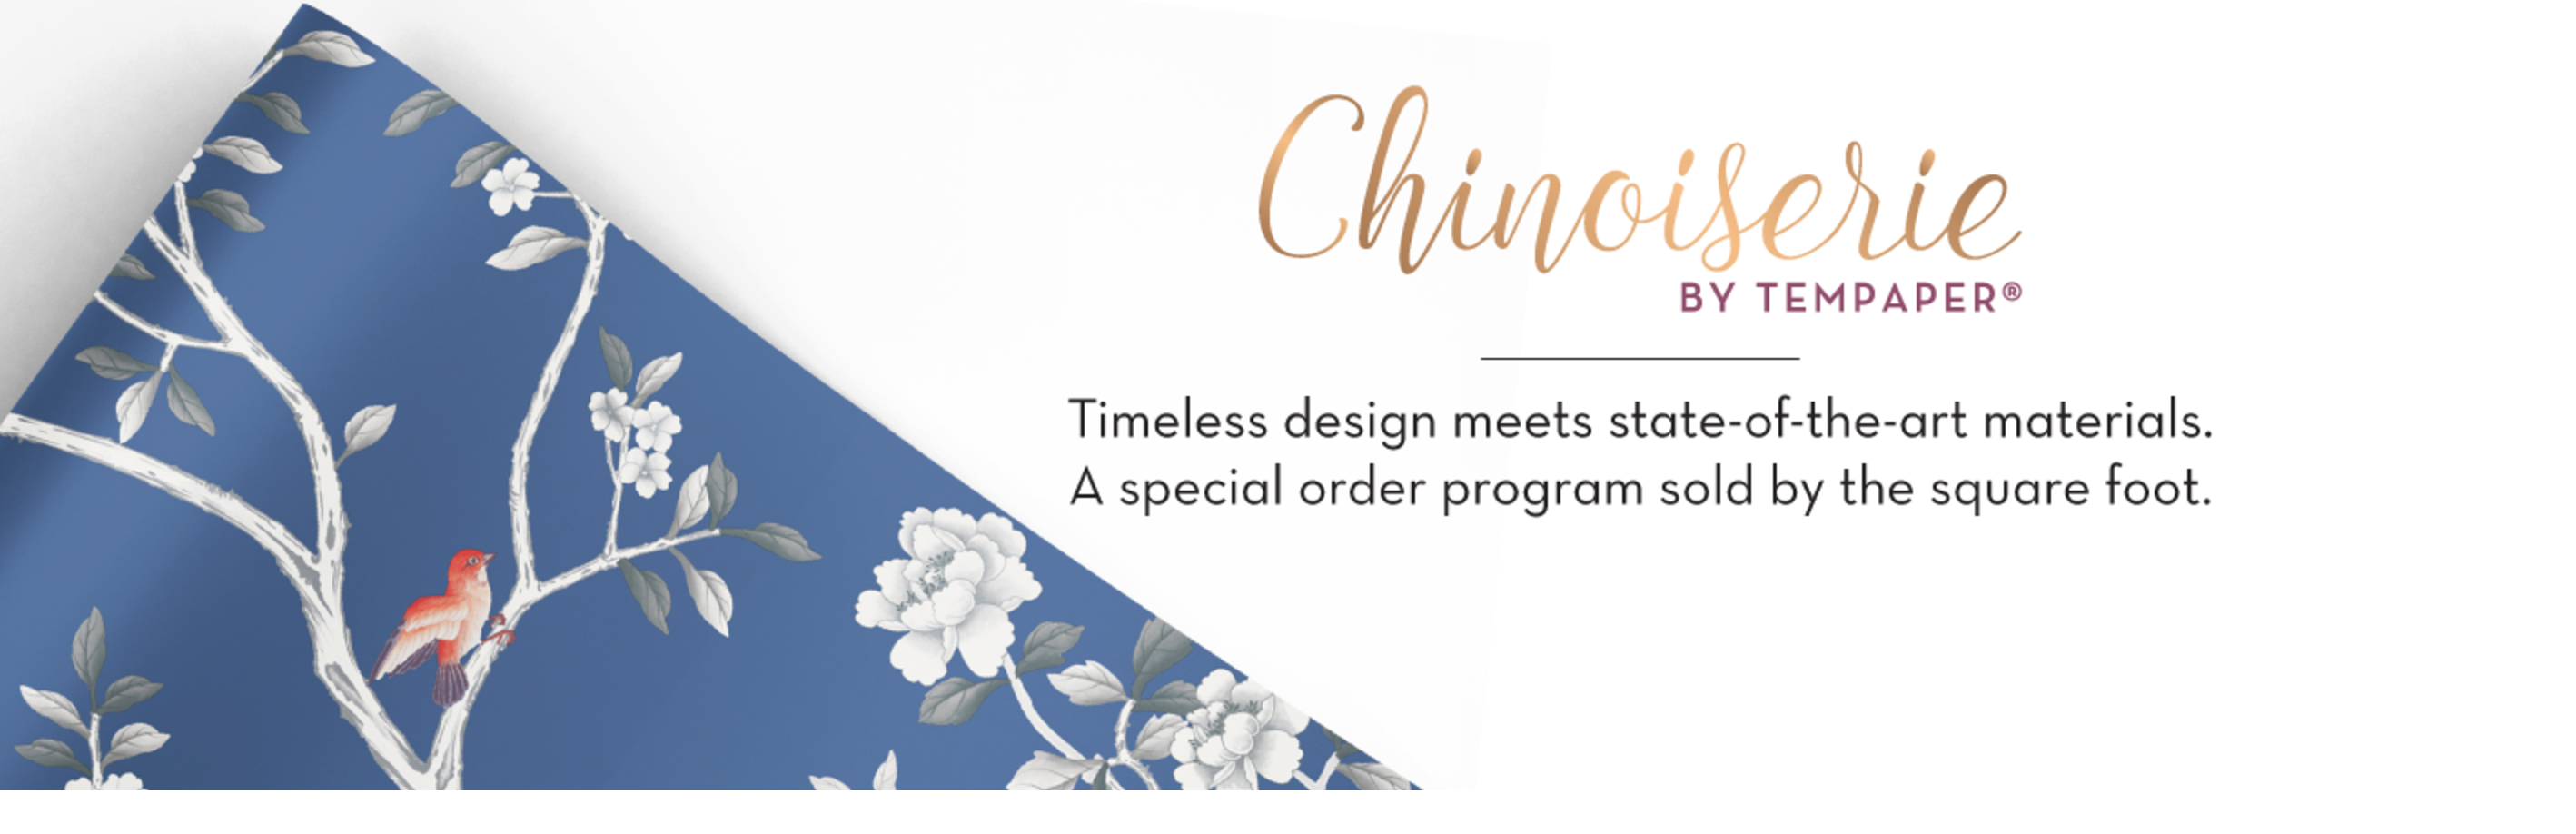 Chinoiserie by Tempaper